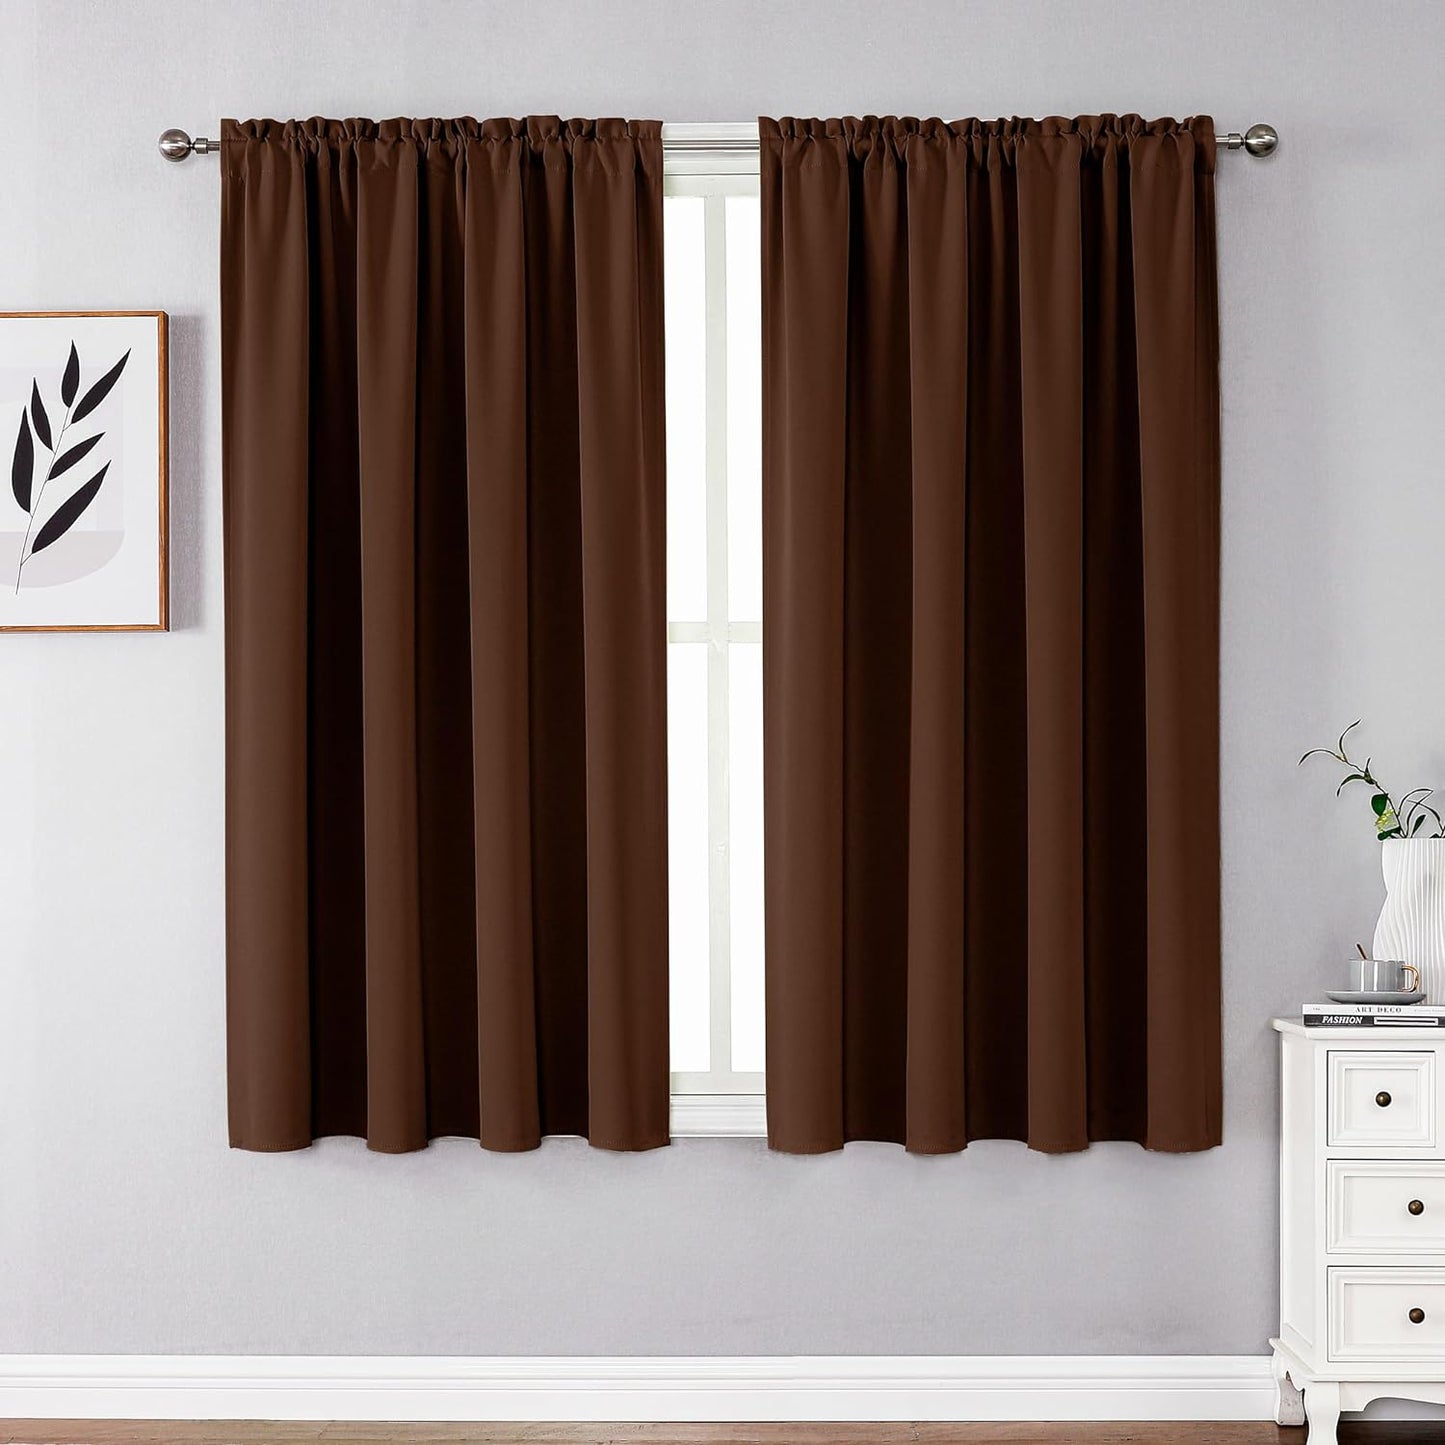 CUCRAF Blackout Curtains 84 Inches Long for Living Room, Light Beige Room Darkening Window Curtain Panels, Rod Pocket Thermal Insulated Solid Drapes for Bedroom, 52X84 Inch, Set of 2 Panels  CUCRAF Chocolate 52W X 54L Inch 2 Panels 